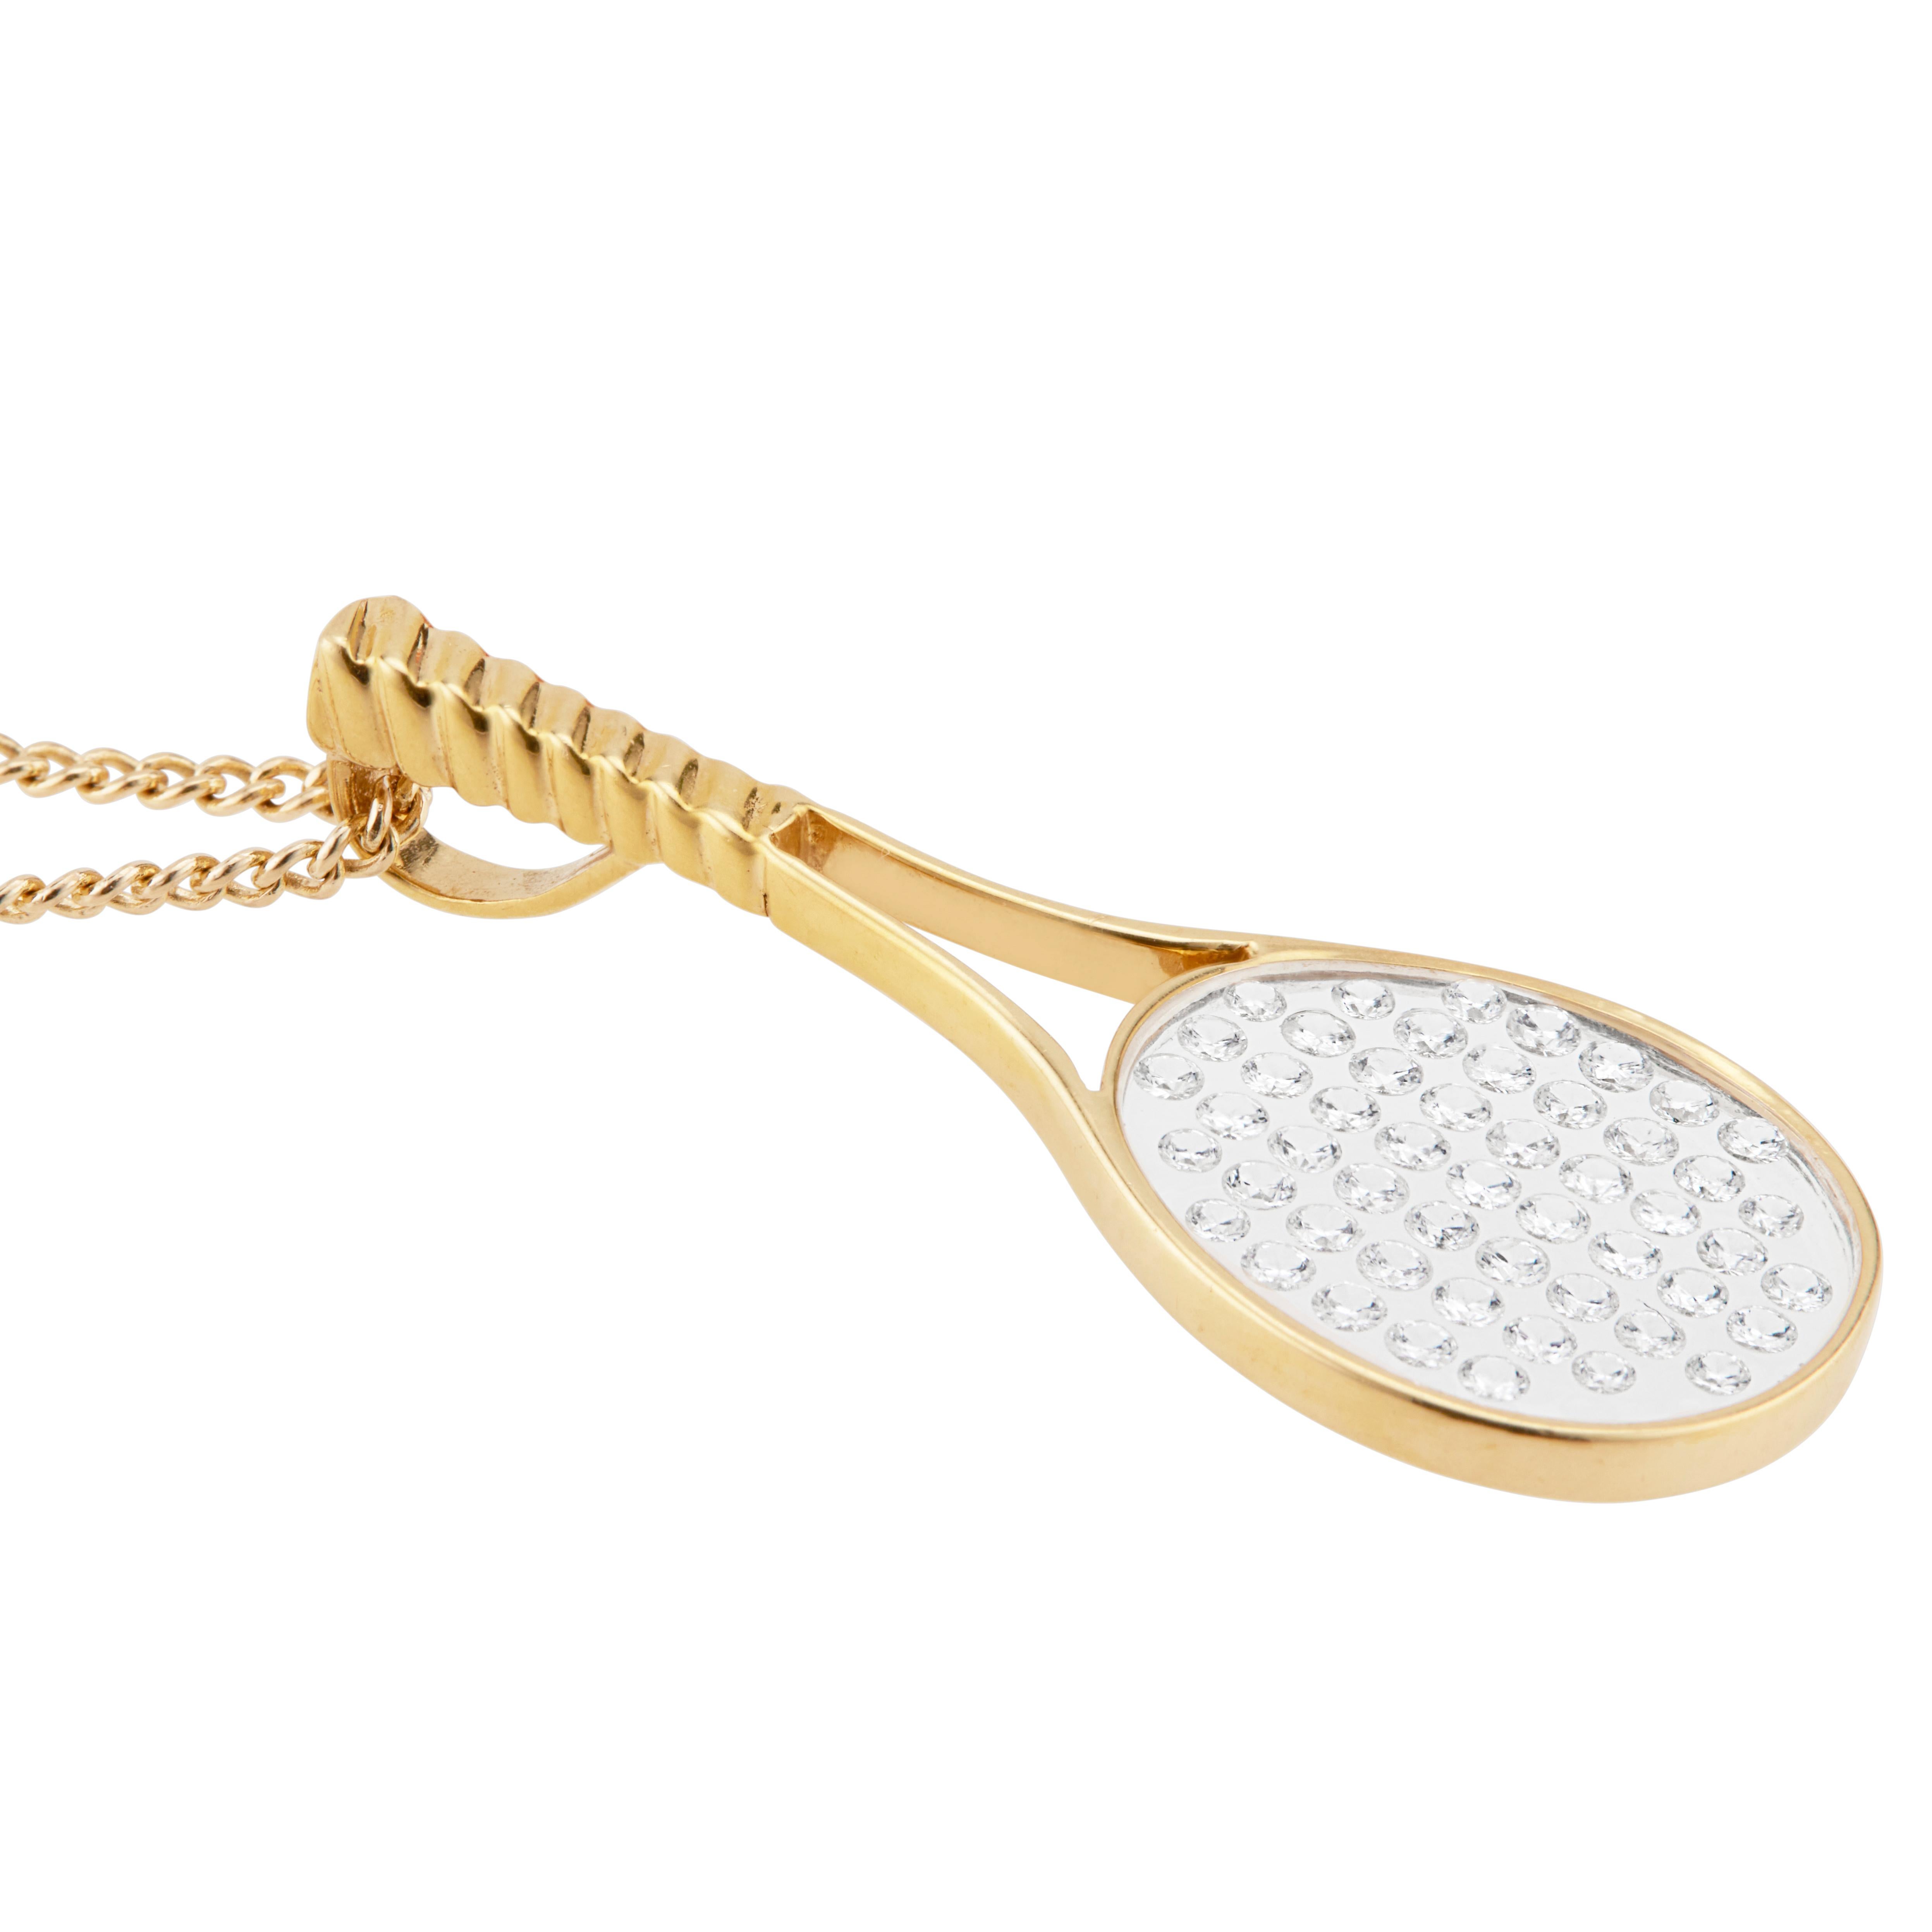 gold tennis racket necklace